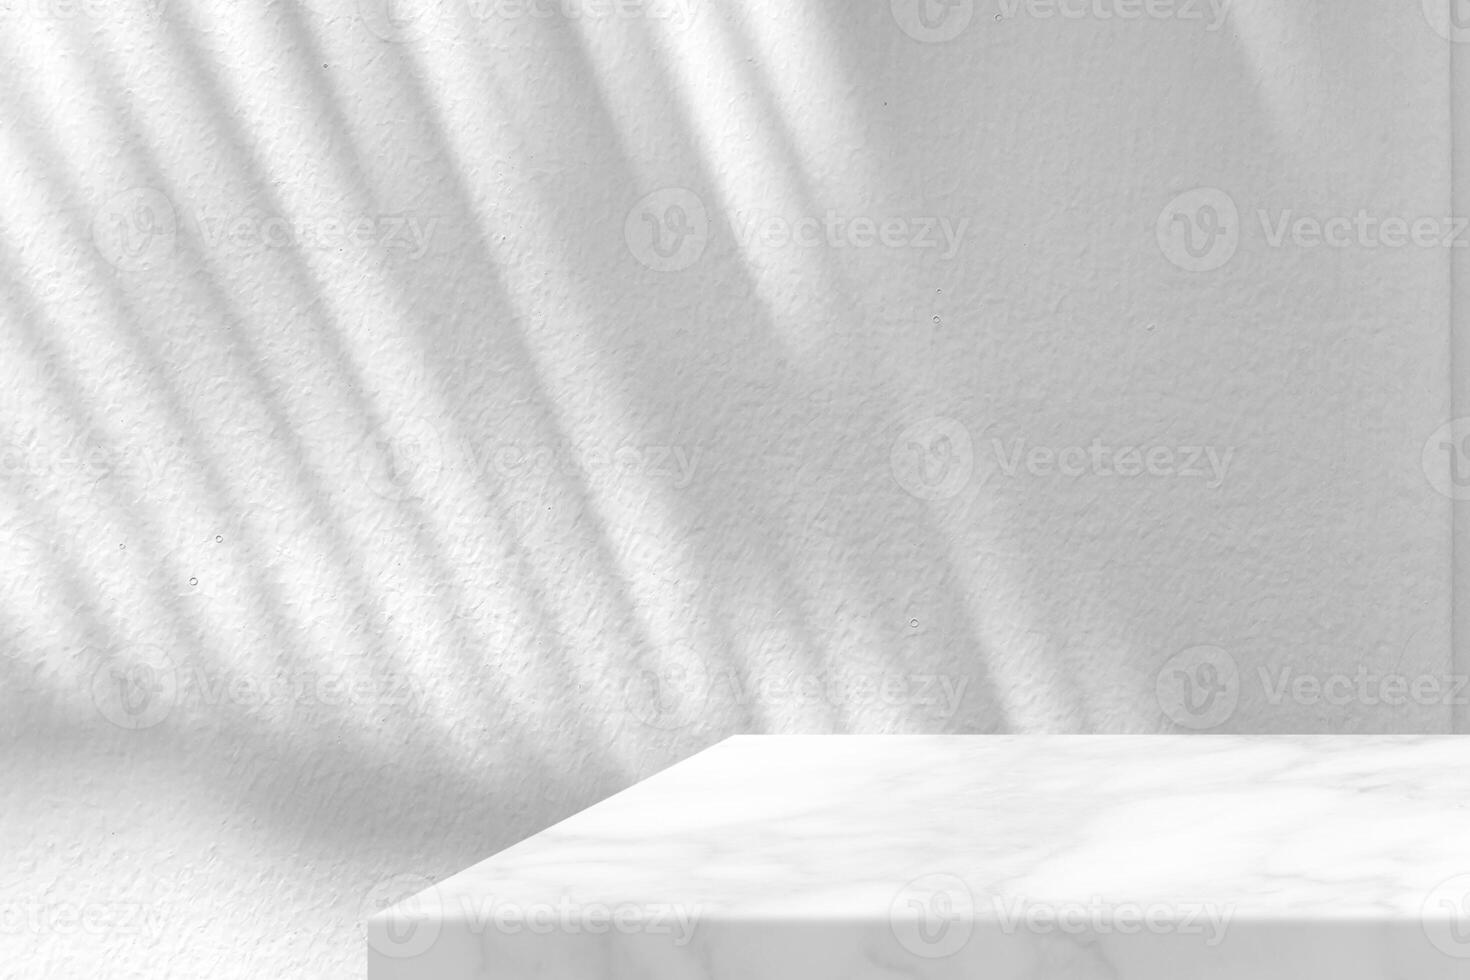 Minimal White Marble Table Corner with Leaves Shadow on Stucco Wall Texture Background, Suitable for Product Presentation Backdrop, Display, and Mock up. photo